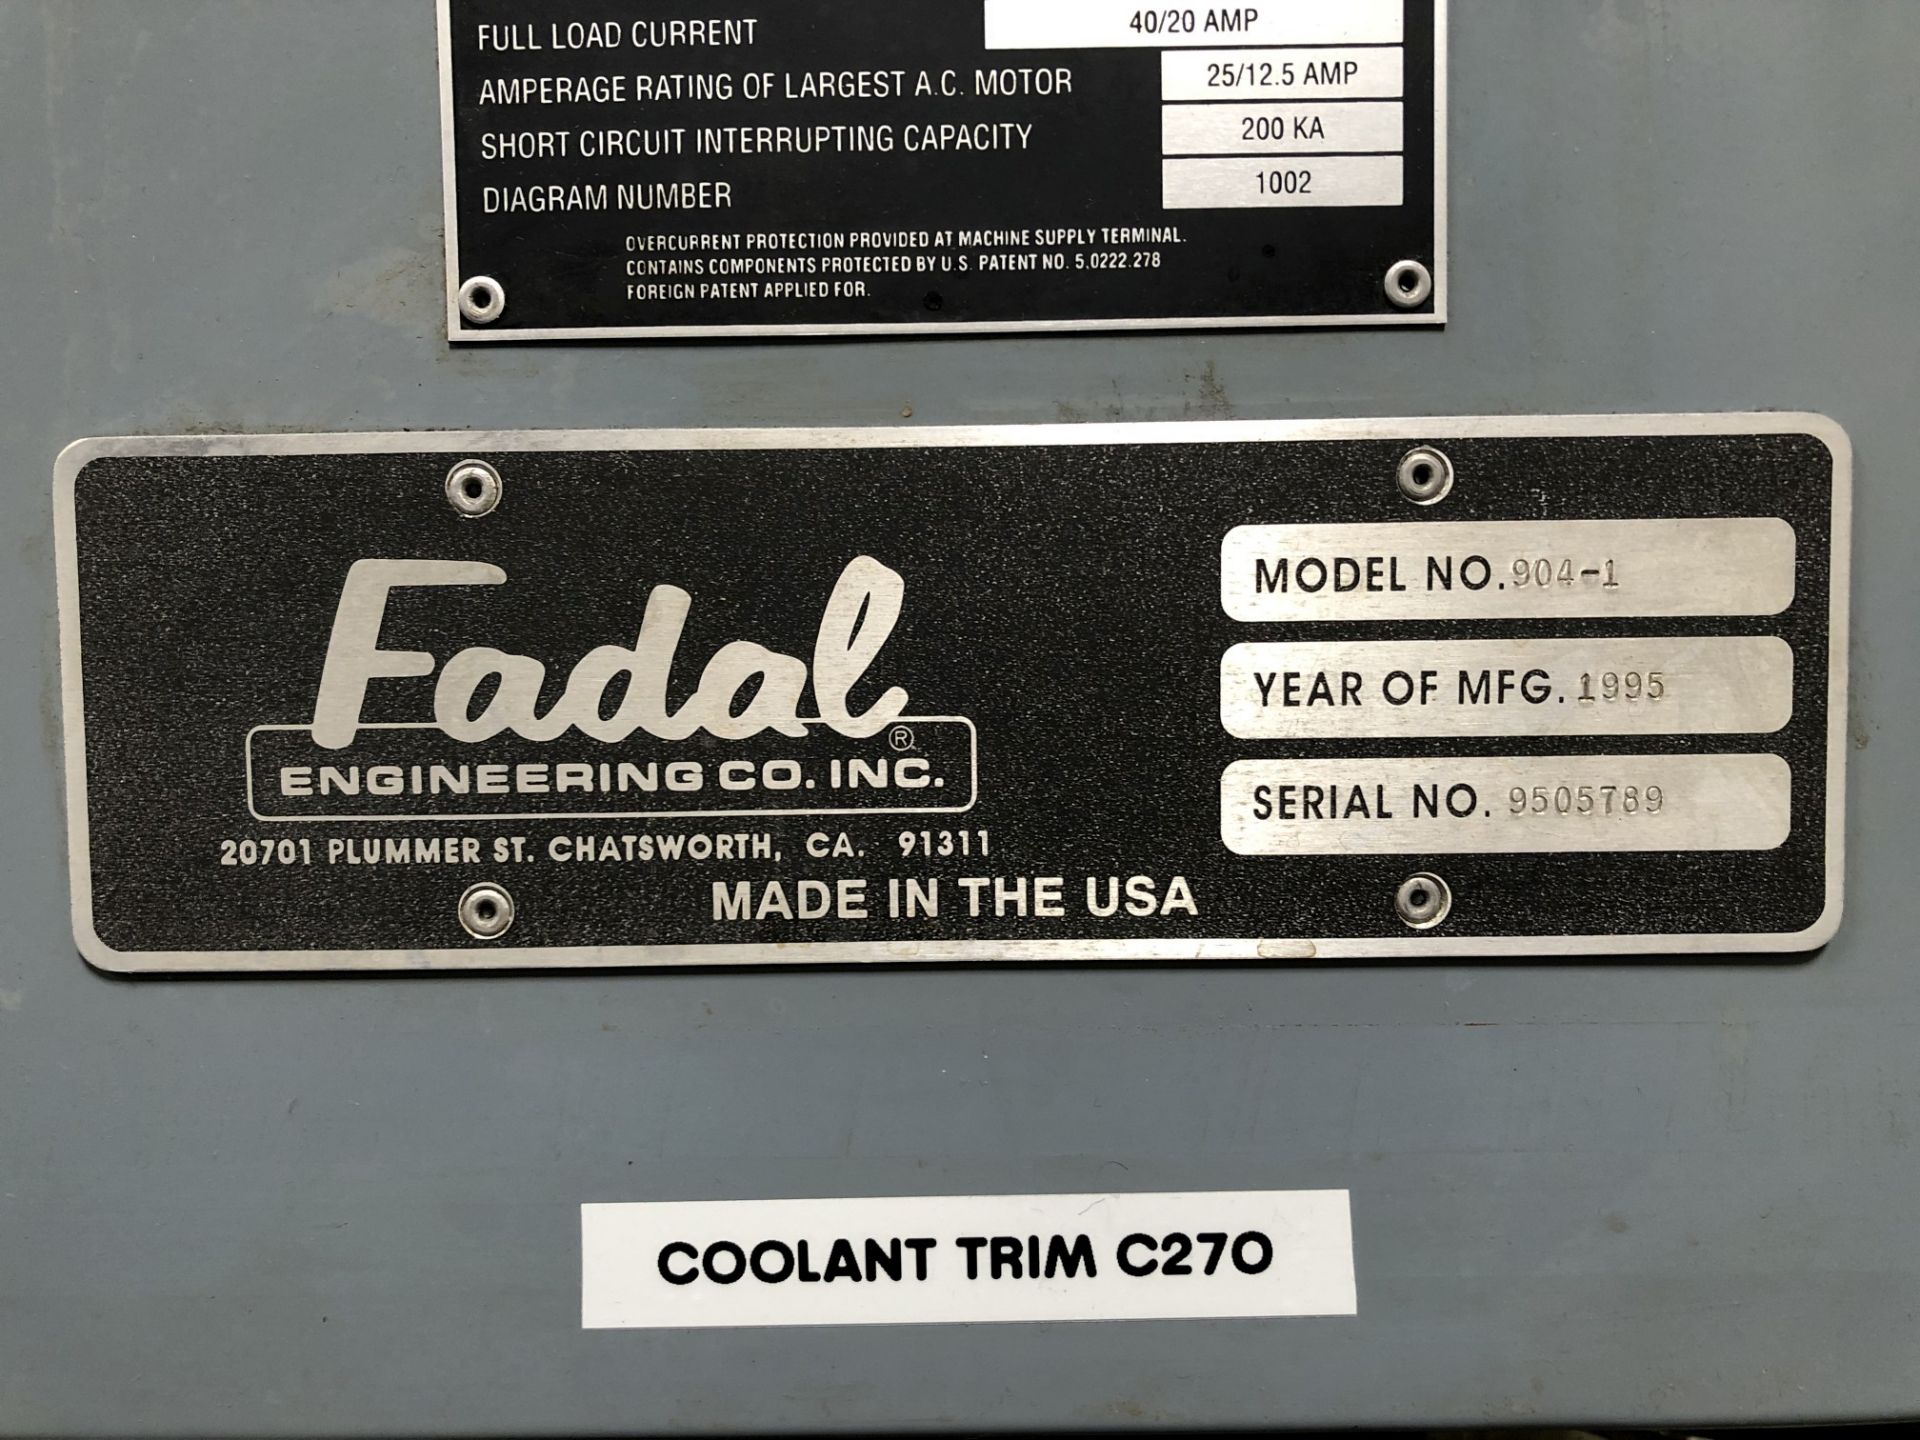 1995 Fadal VMC3016 Vertical Machining Center, X=30", Y=16", Z=20", 21 ATC, 16" x 36" Table, Fadal - Image 9 of 11